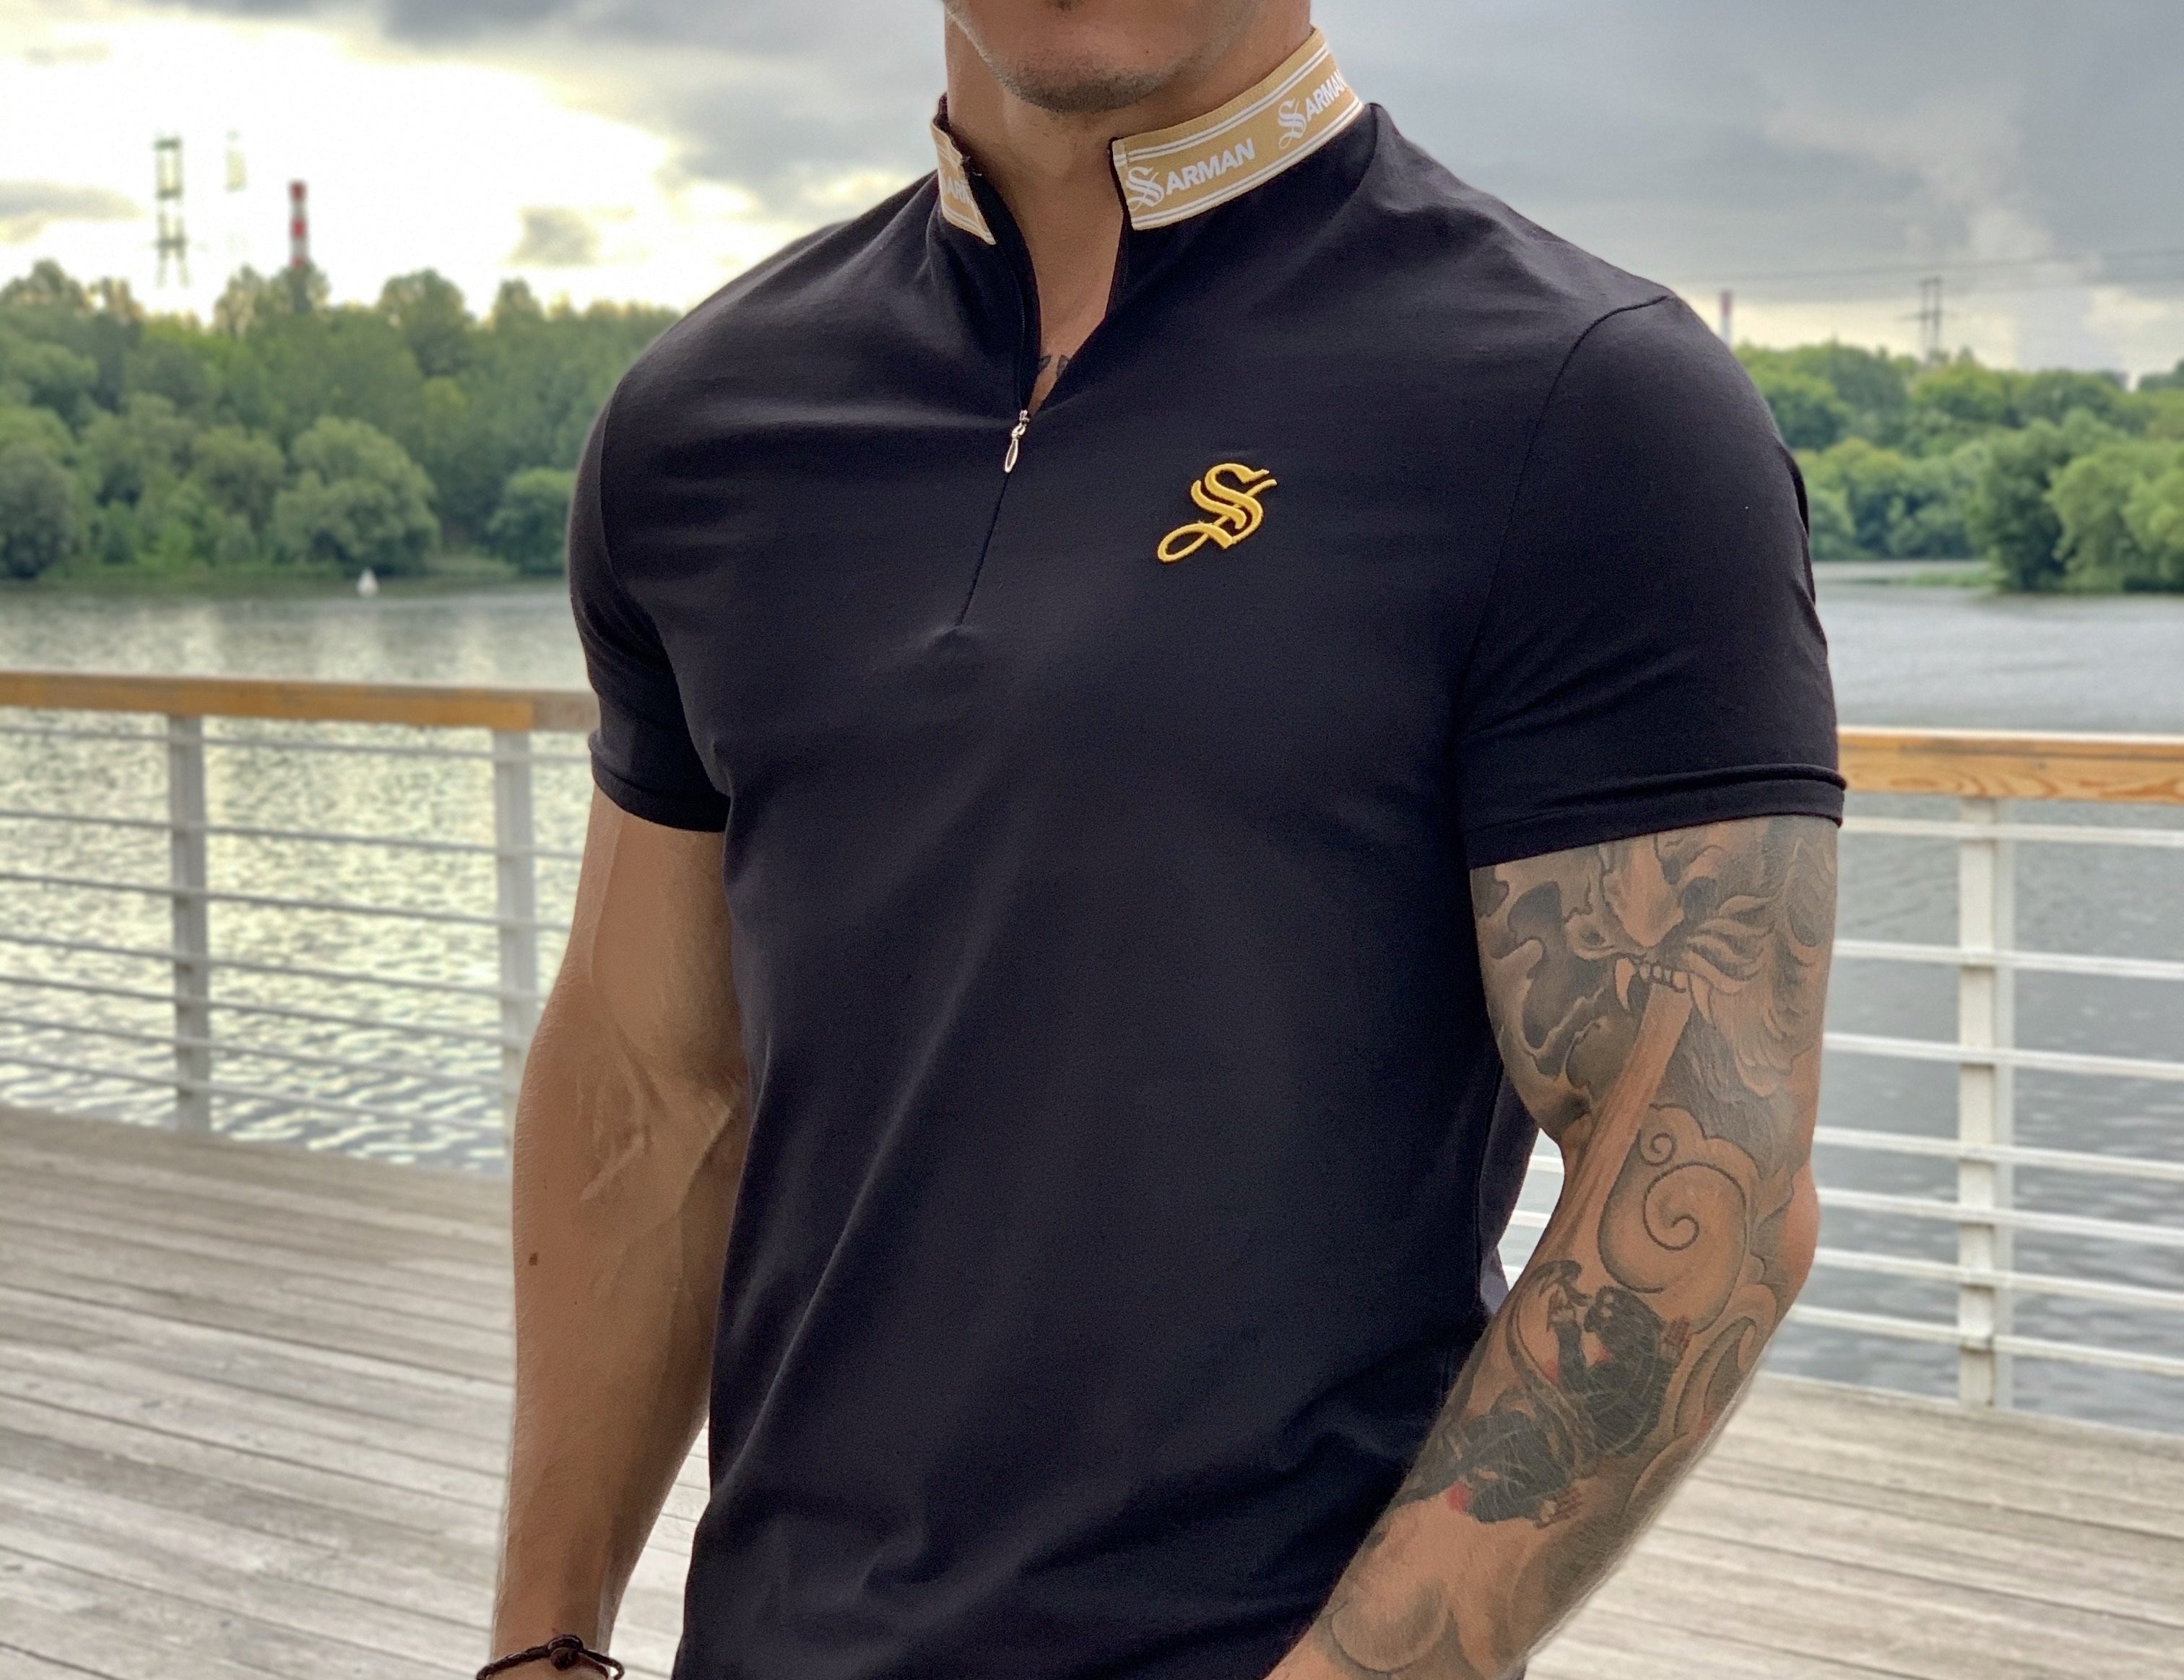 Domination - Black T-shirt for Men (PRE-ORDER DISPATCH DATE 25 SEPTEMBER) - Sarman Fashion - Wholesale Clothing Fashion Brand for Men from Canada